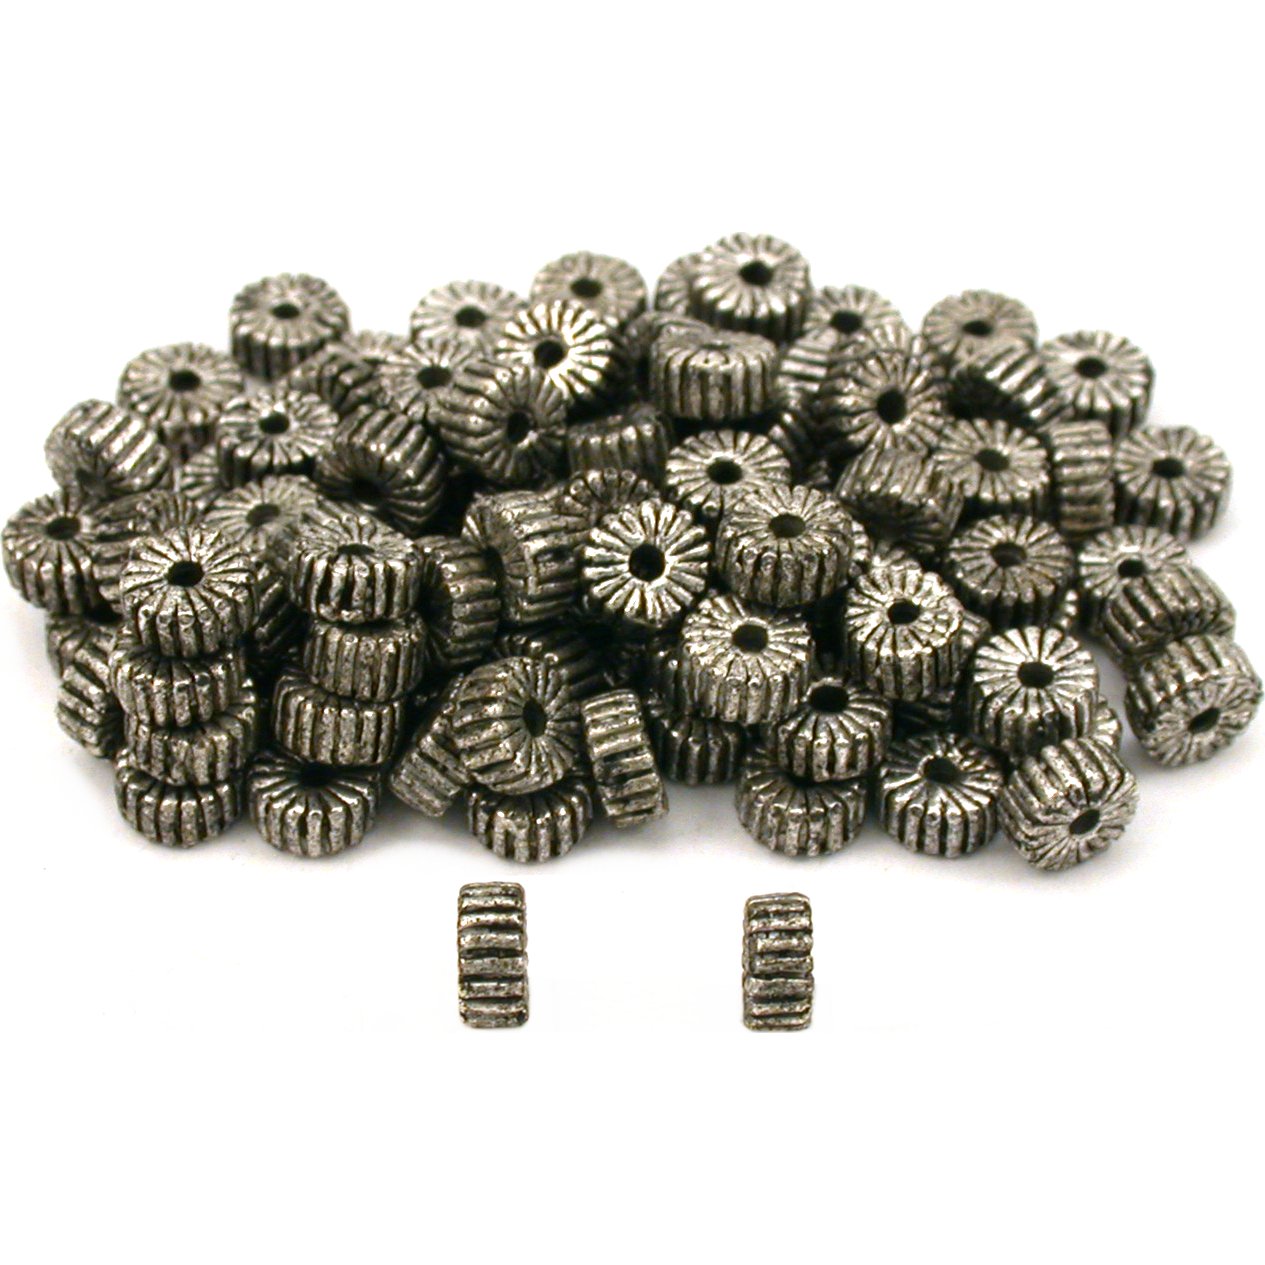 Corrugated Spacer Bali Beads Antique Silver Plated 5mm 100Pcs